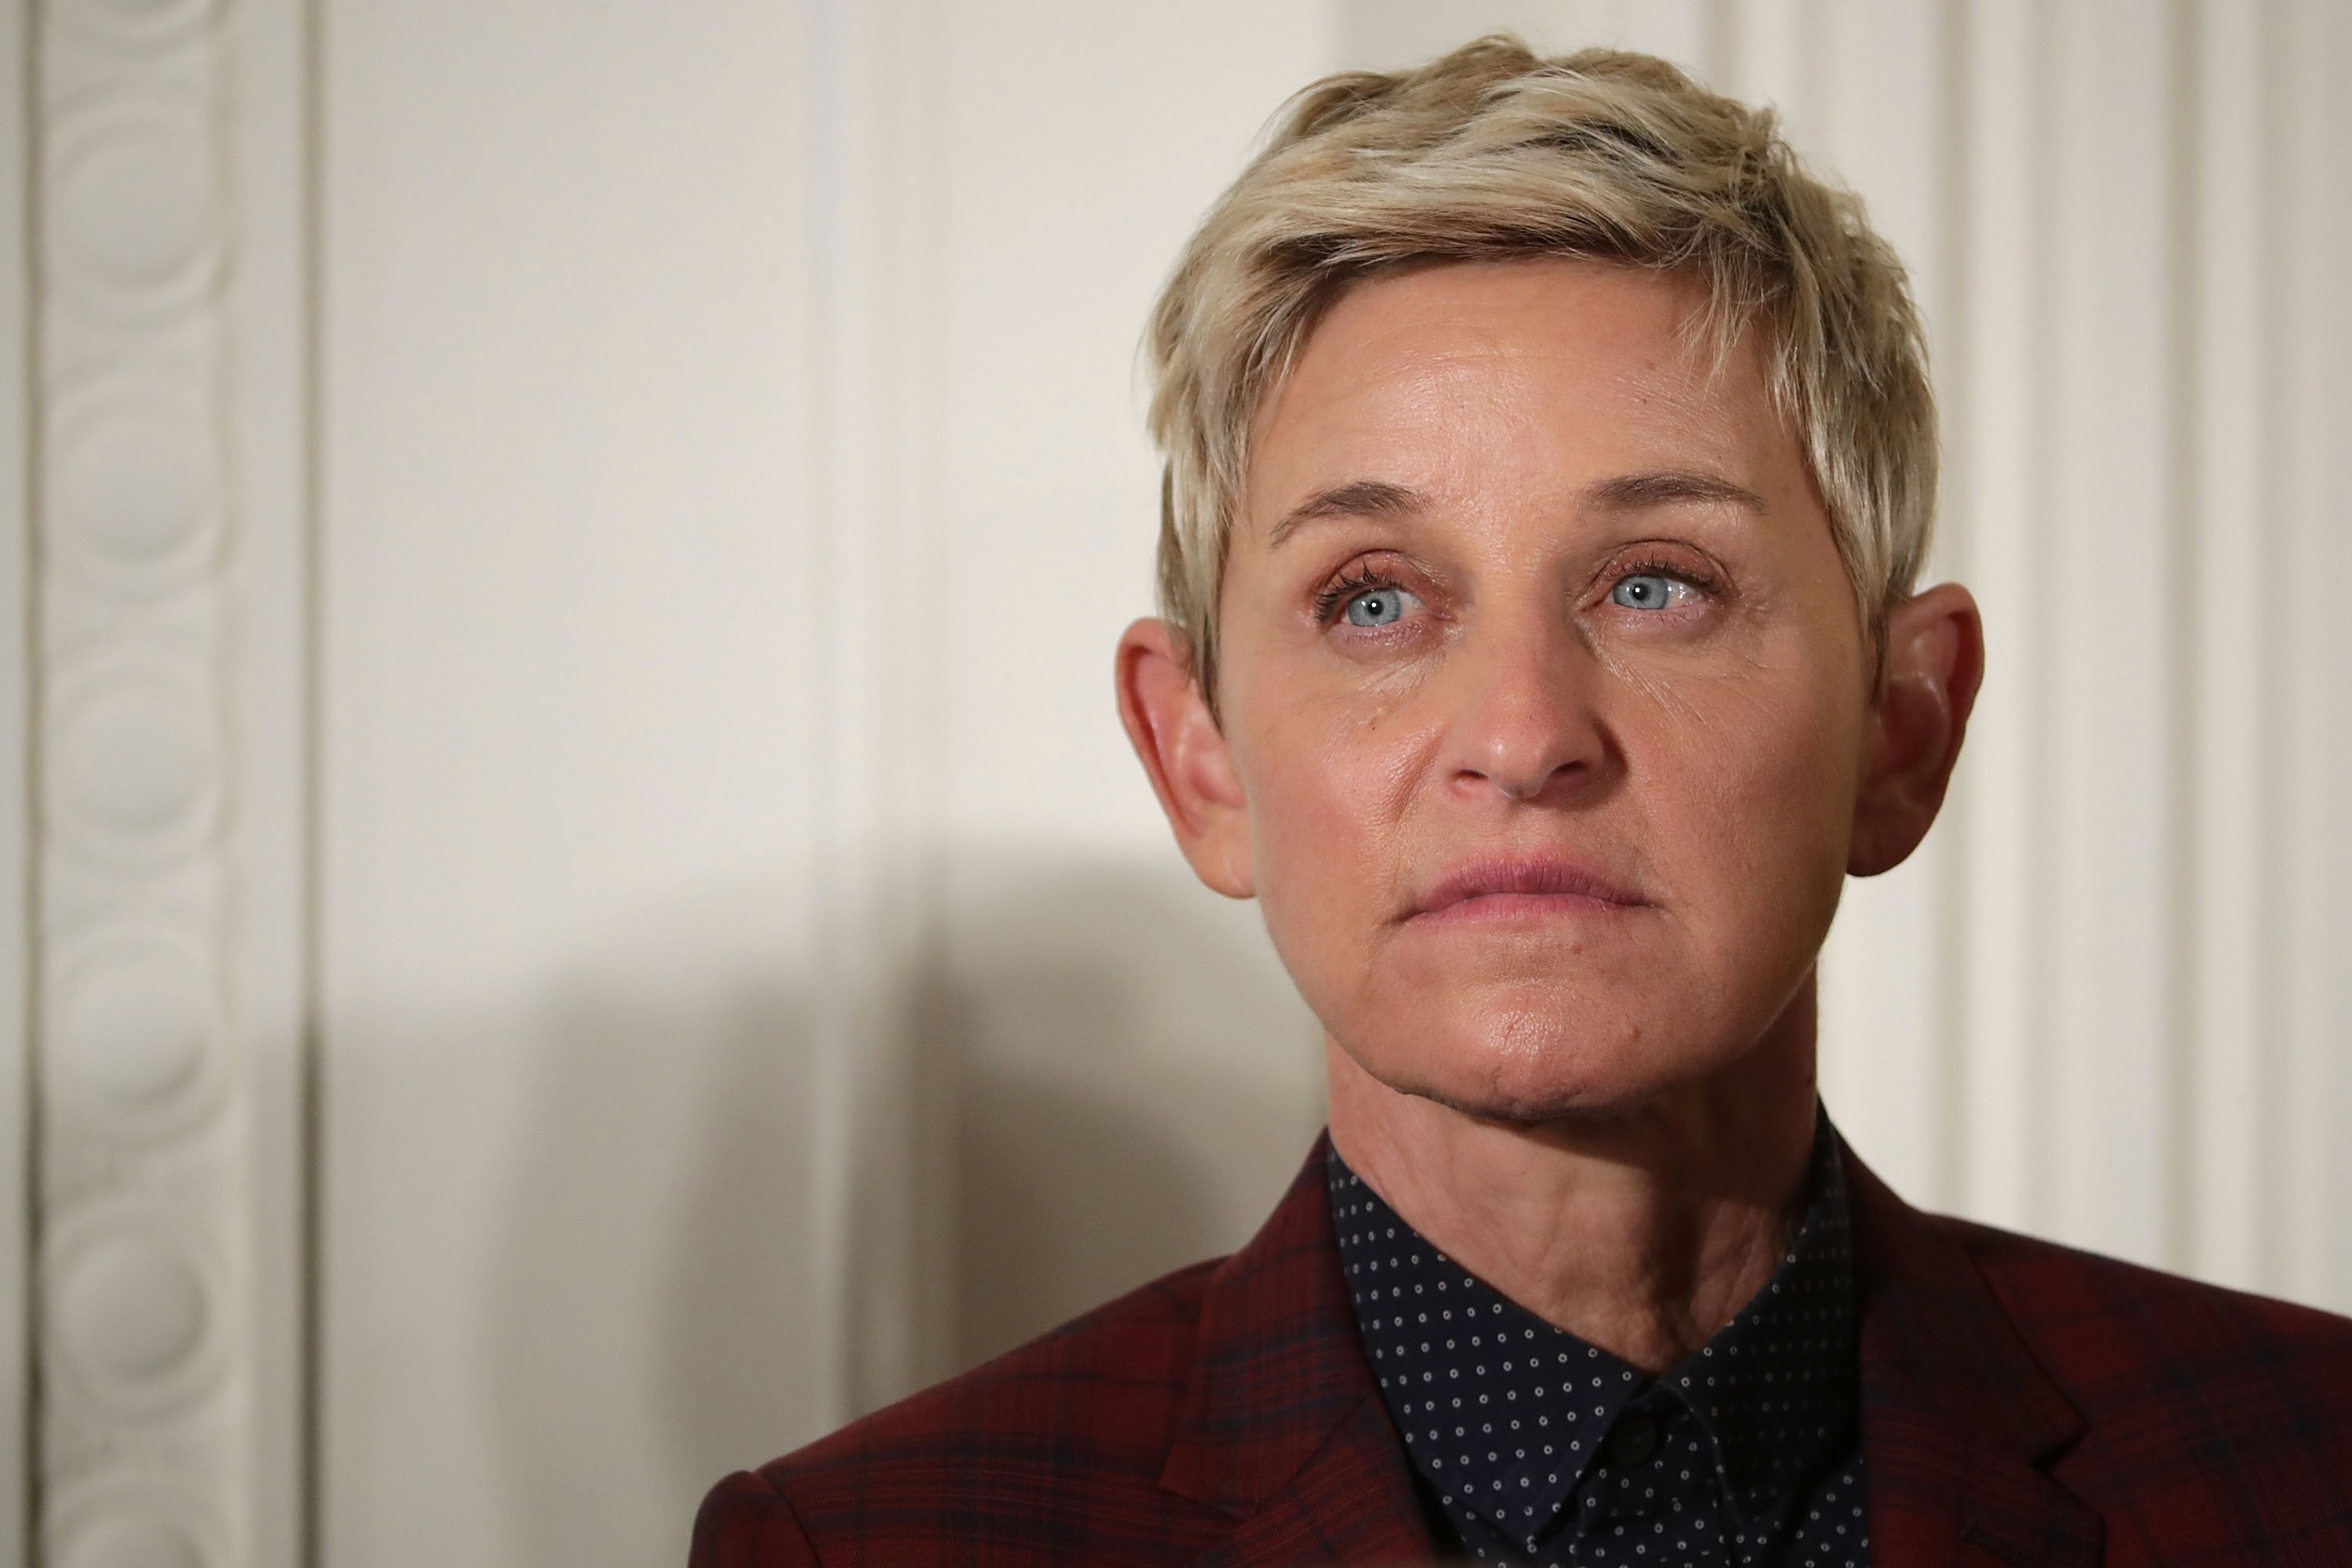 Ellen DeGeneres waits to receive the Presidential Medal of Freedom in Washington, DC on November 22, 2016 | Photo: Getty Images